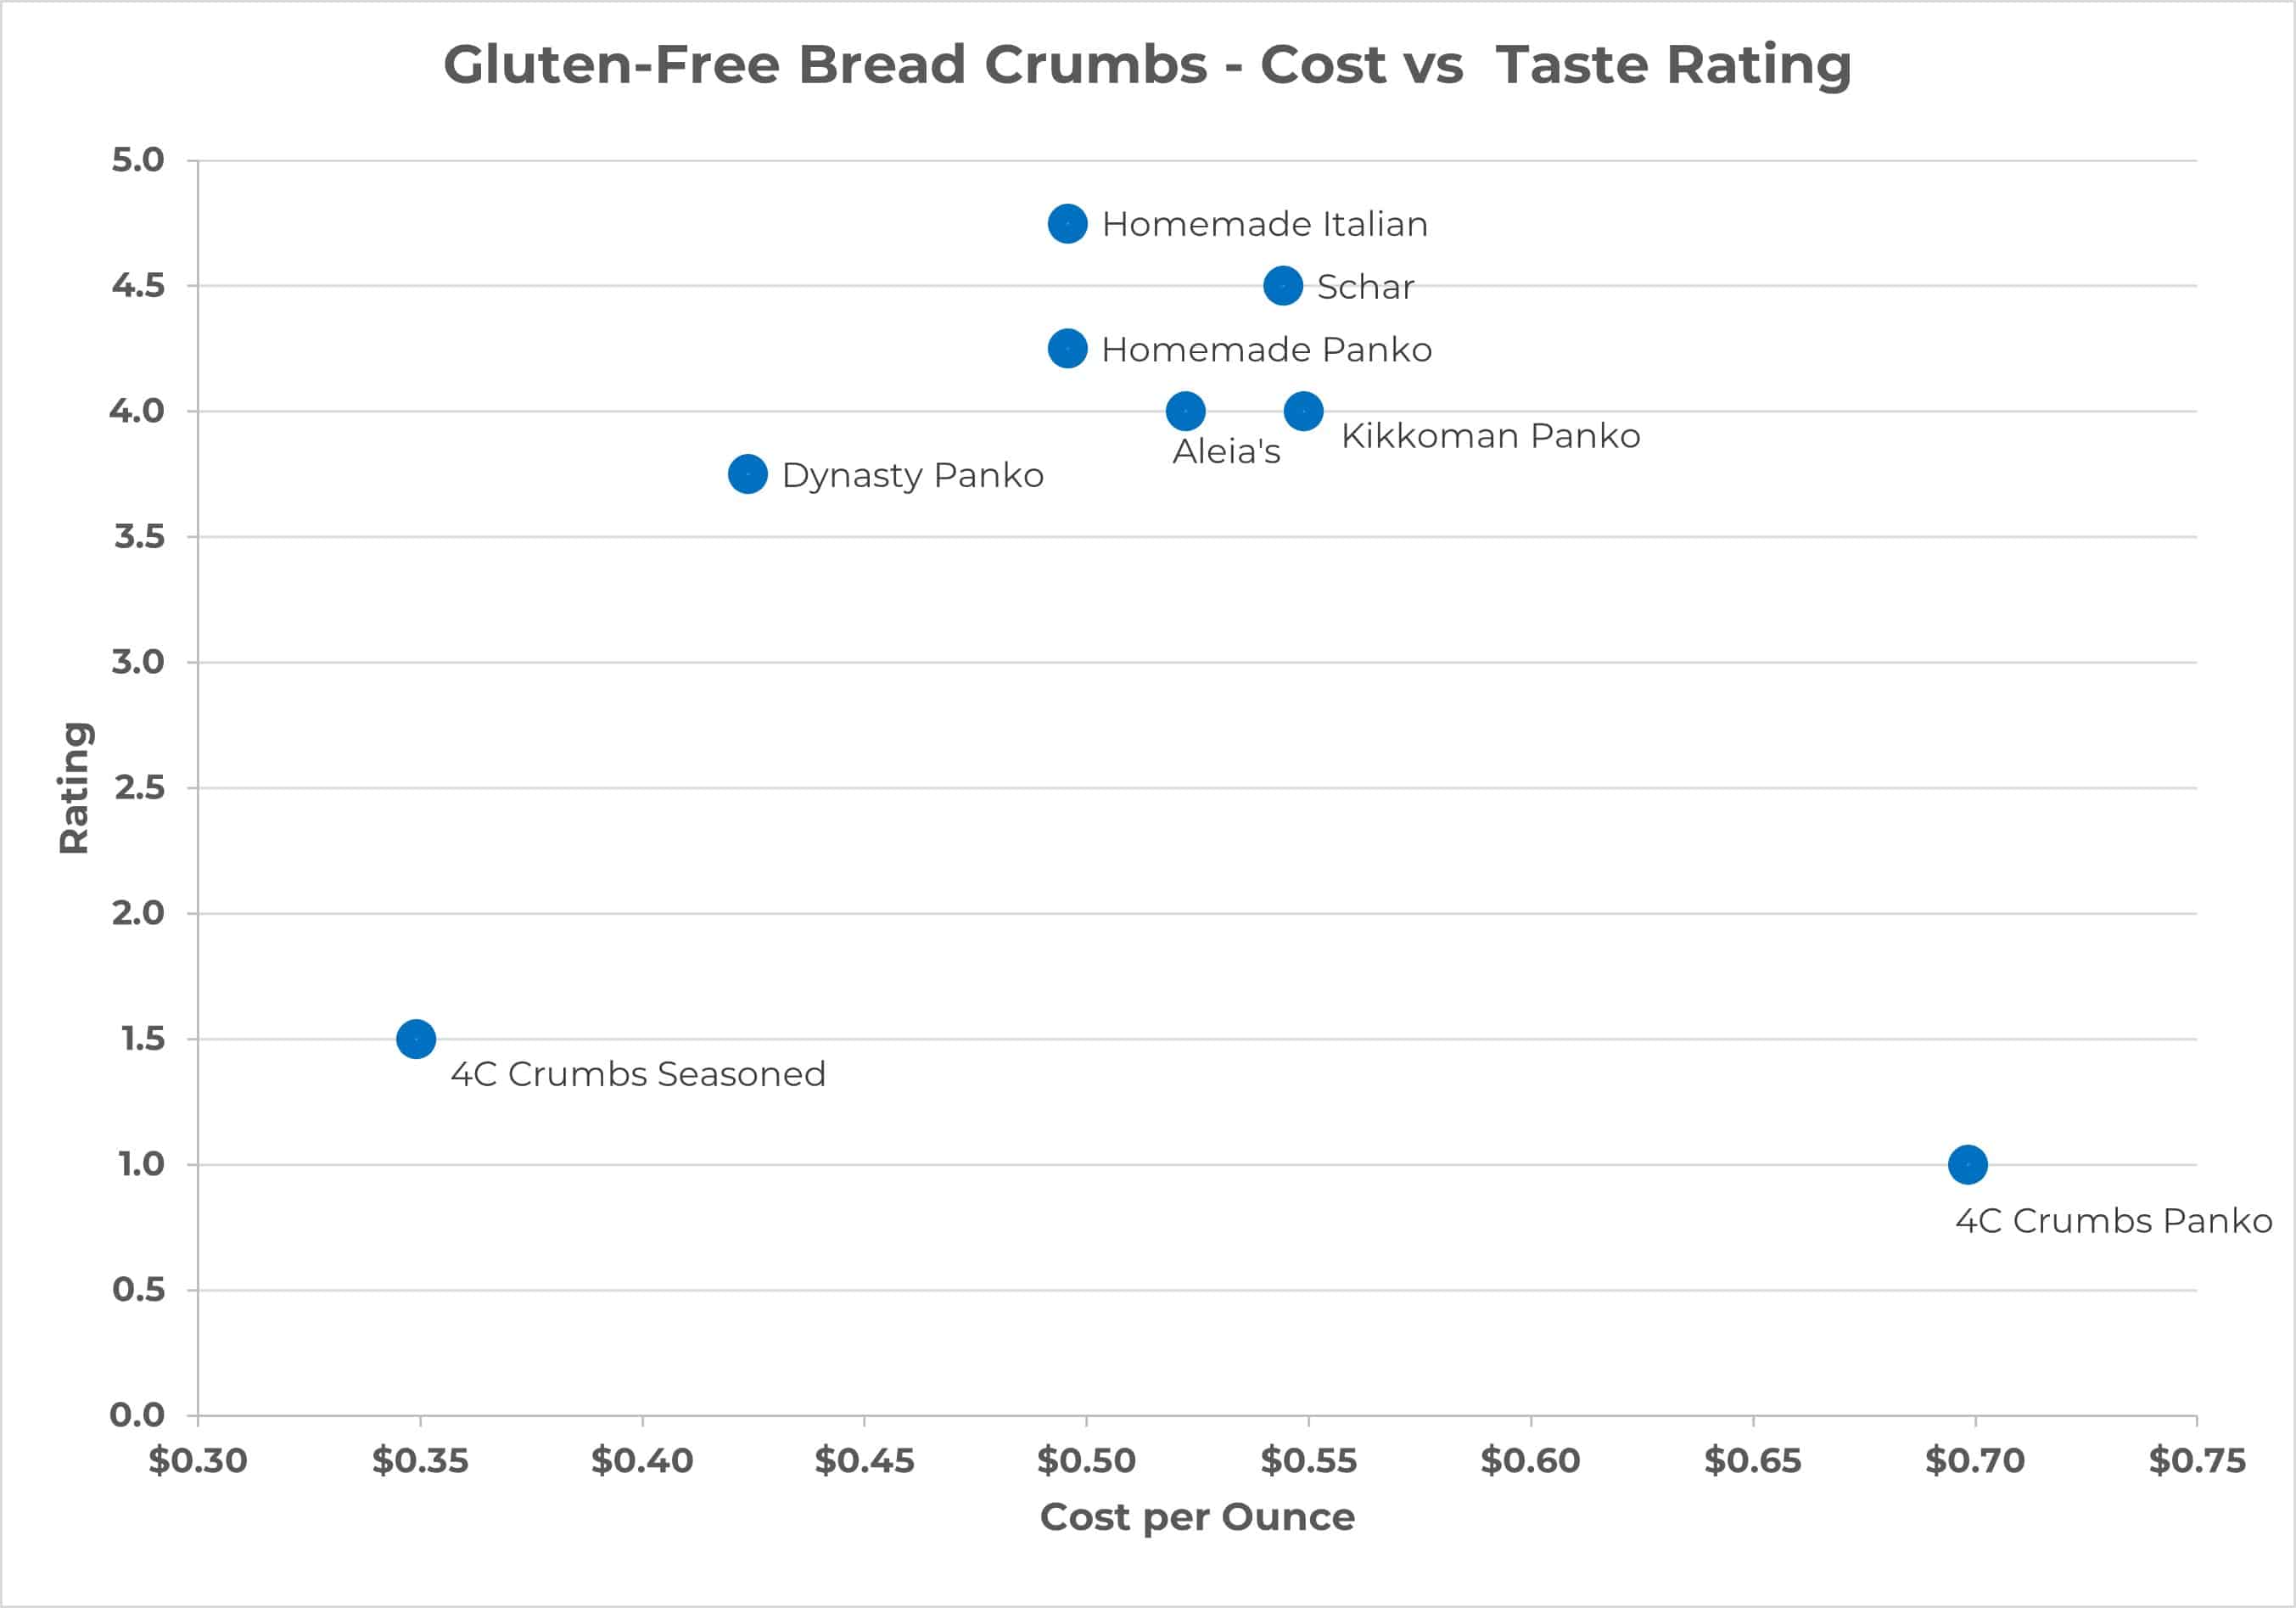 A graph comparing the cost and taste rating of gluten-free bread crumb brands.